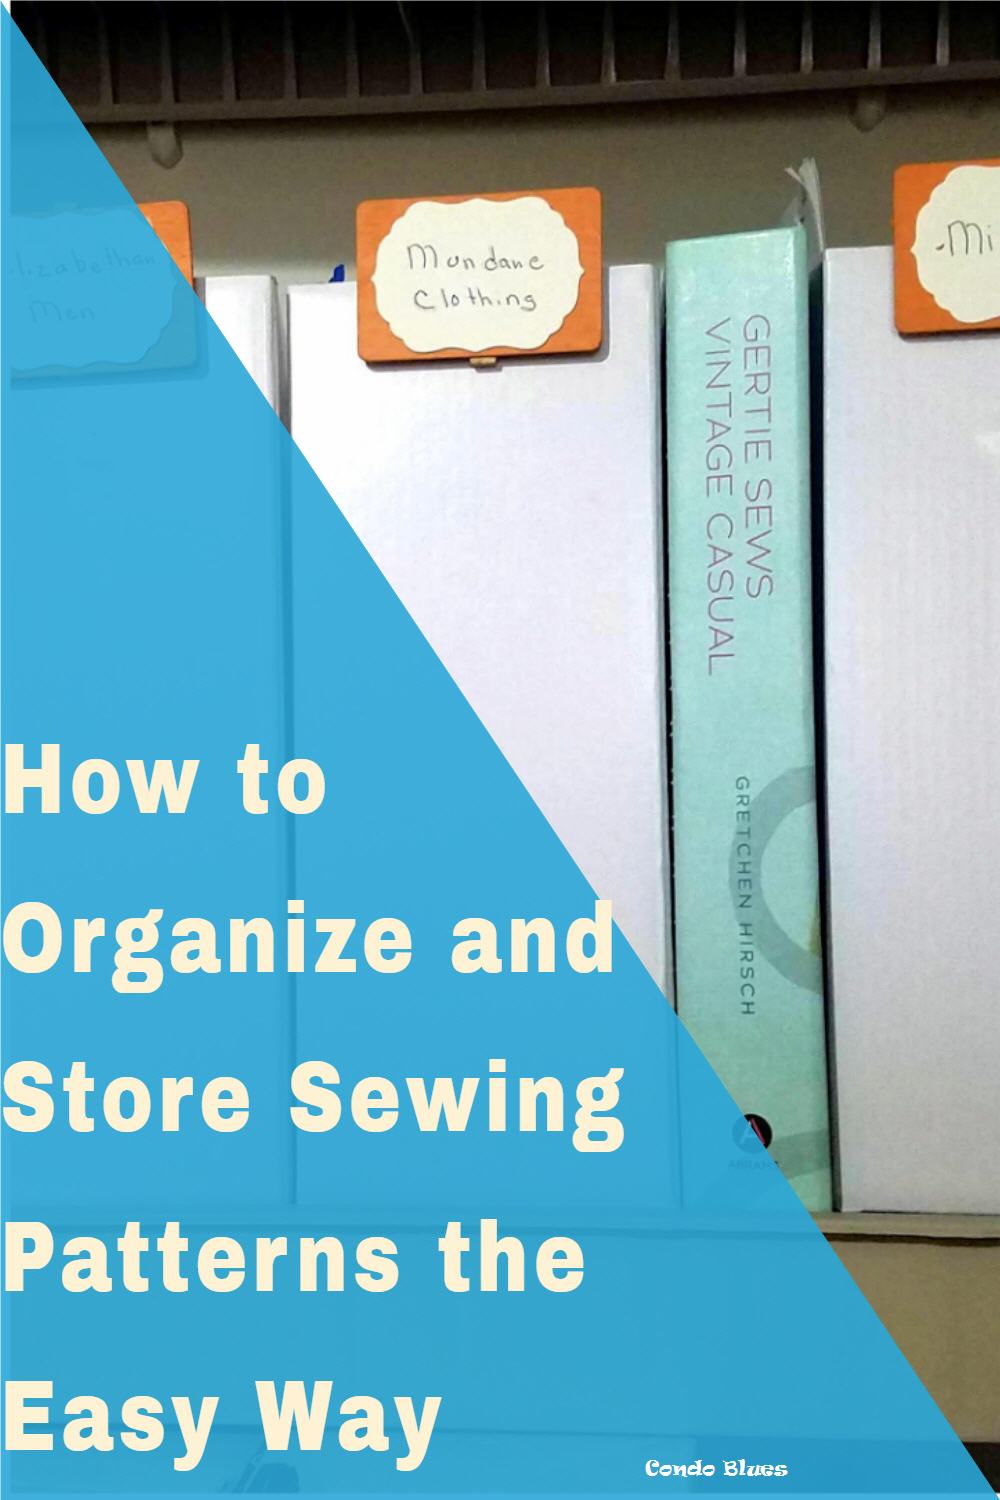 HOW TO STORE SEWING PATTERNS - 6 CREATIVE IDEAS